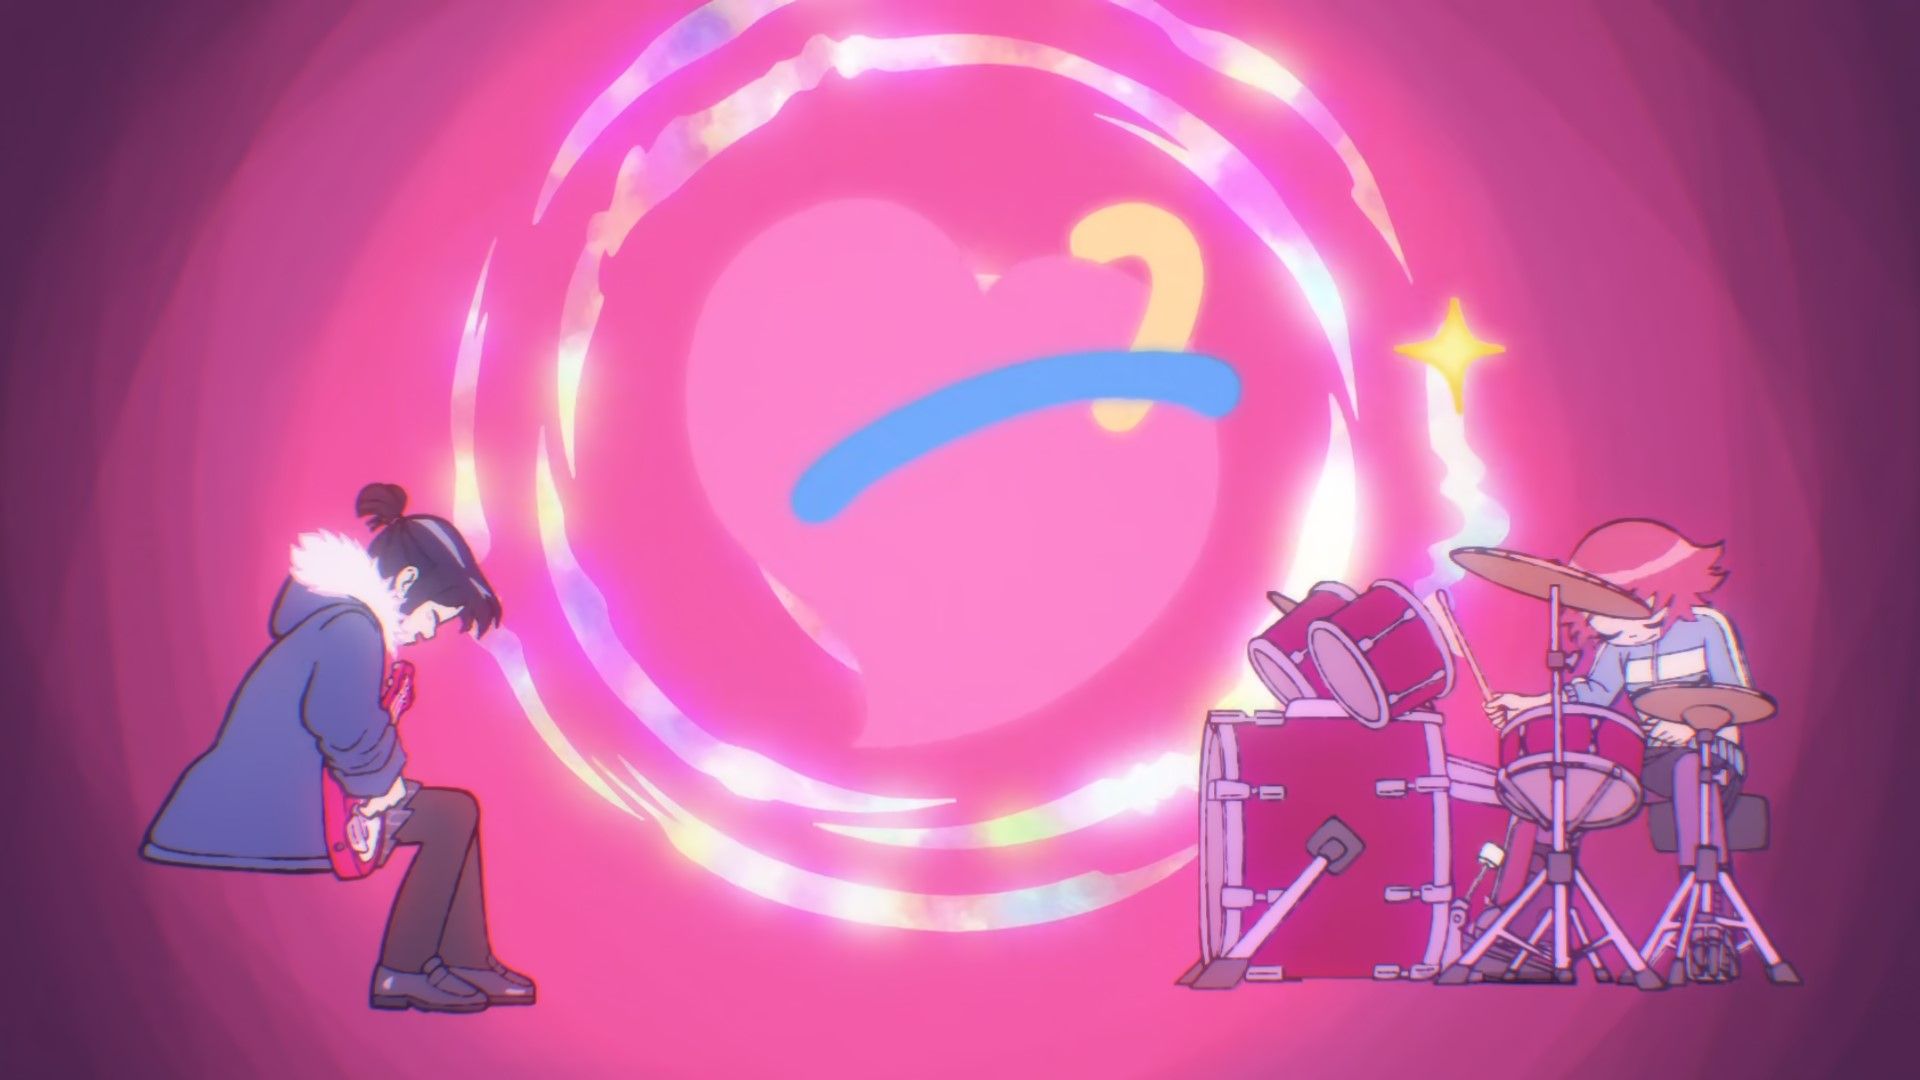 Screenshot from Netflix's Scott Pilgrim Takes Off anime show Knives playing a bass while wearing Scott old jacket and him getting into the groove on drums while a large pink heart floats between them.